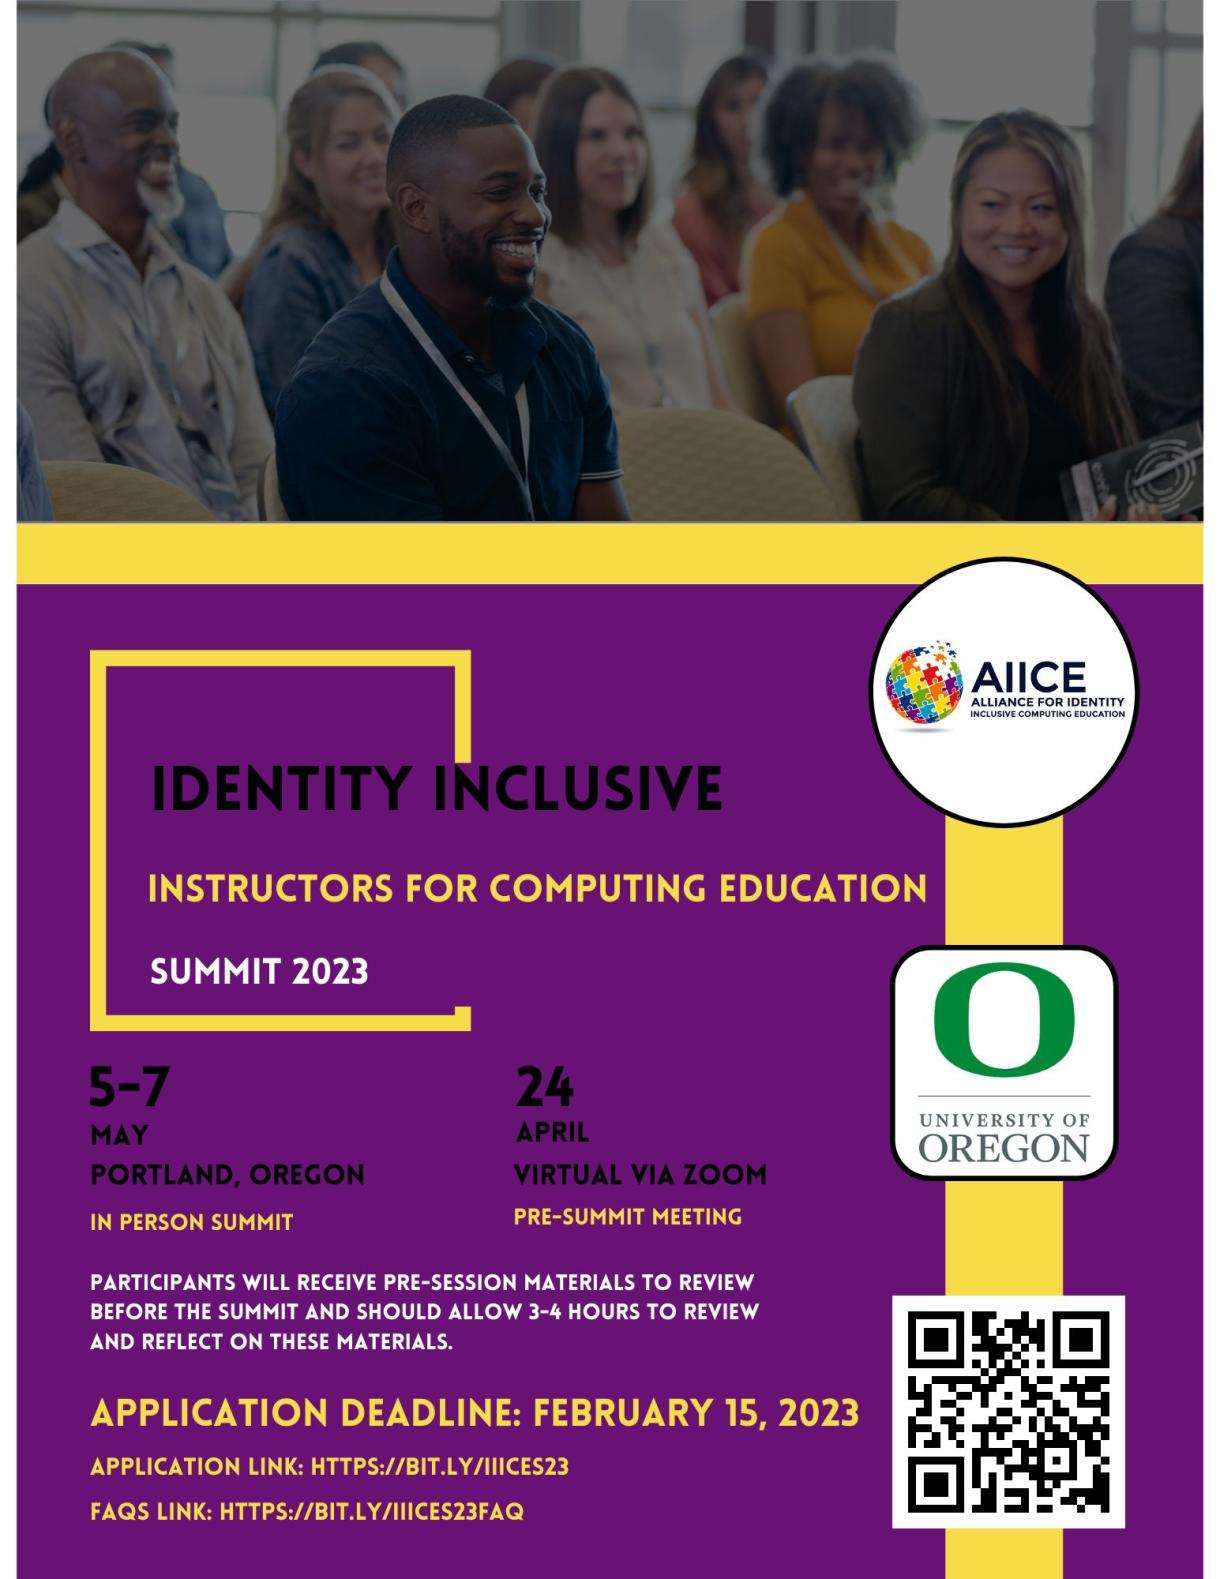 Education Summit Identity Inclusive Instructors for Computing Flyer2